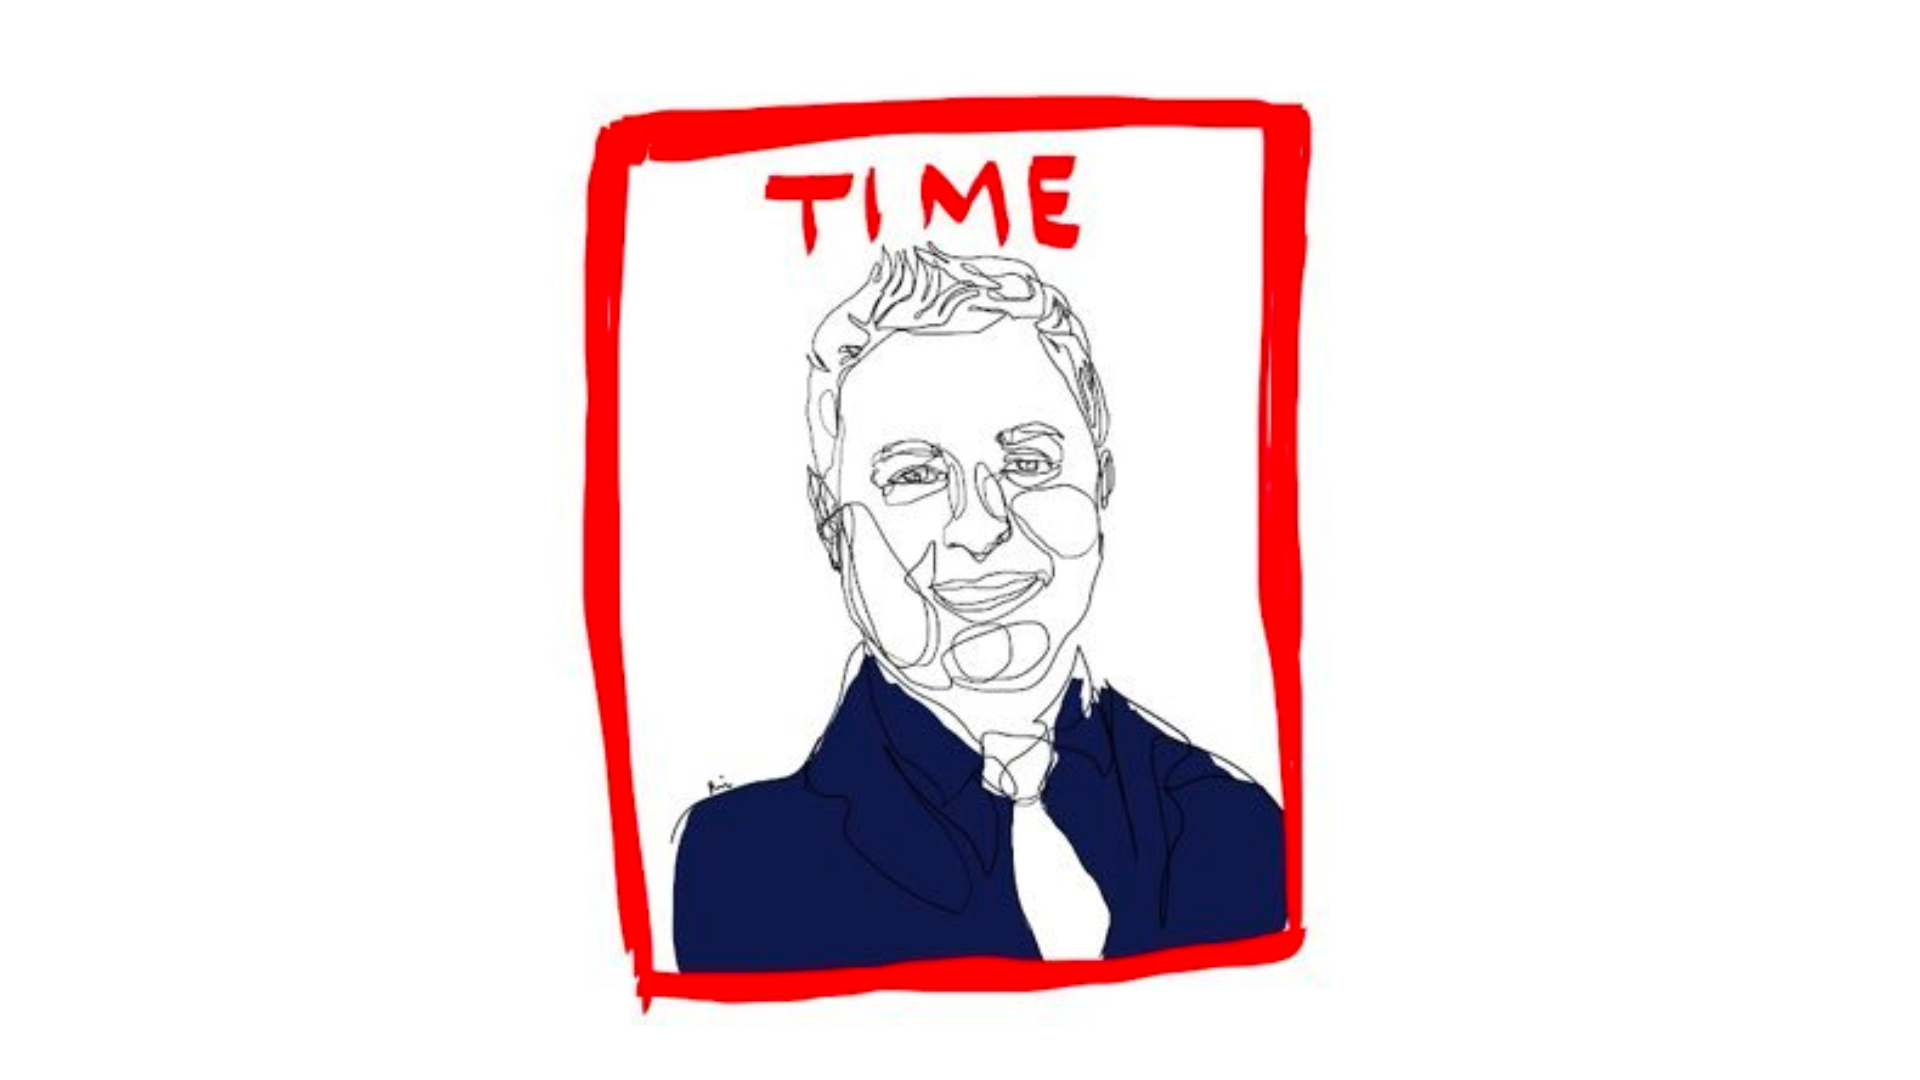 Time’s Keith Grossman and the Lure of Web3 Media